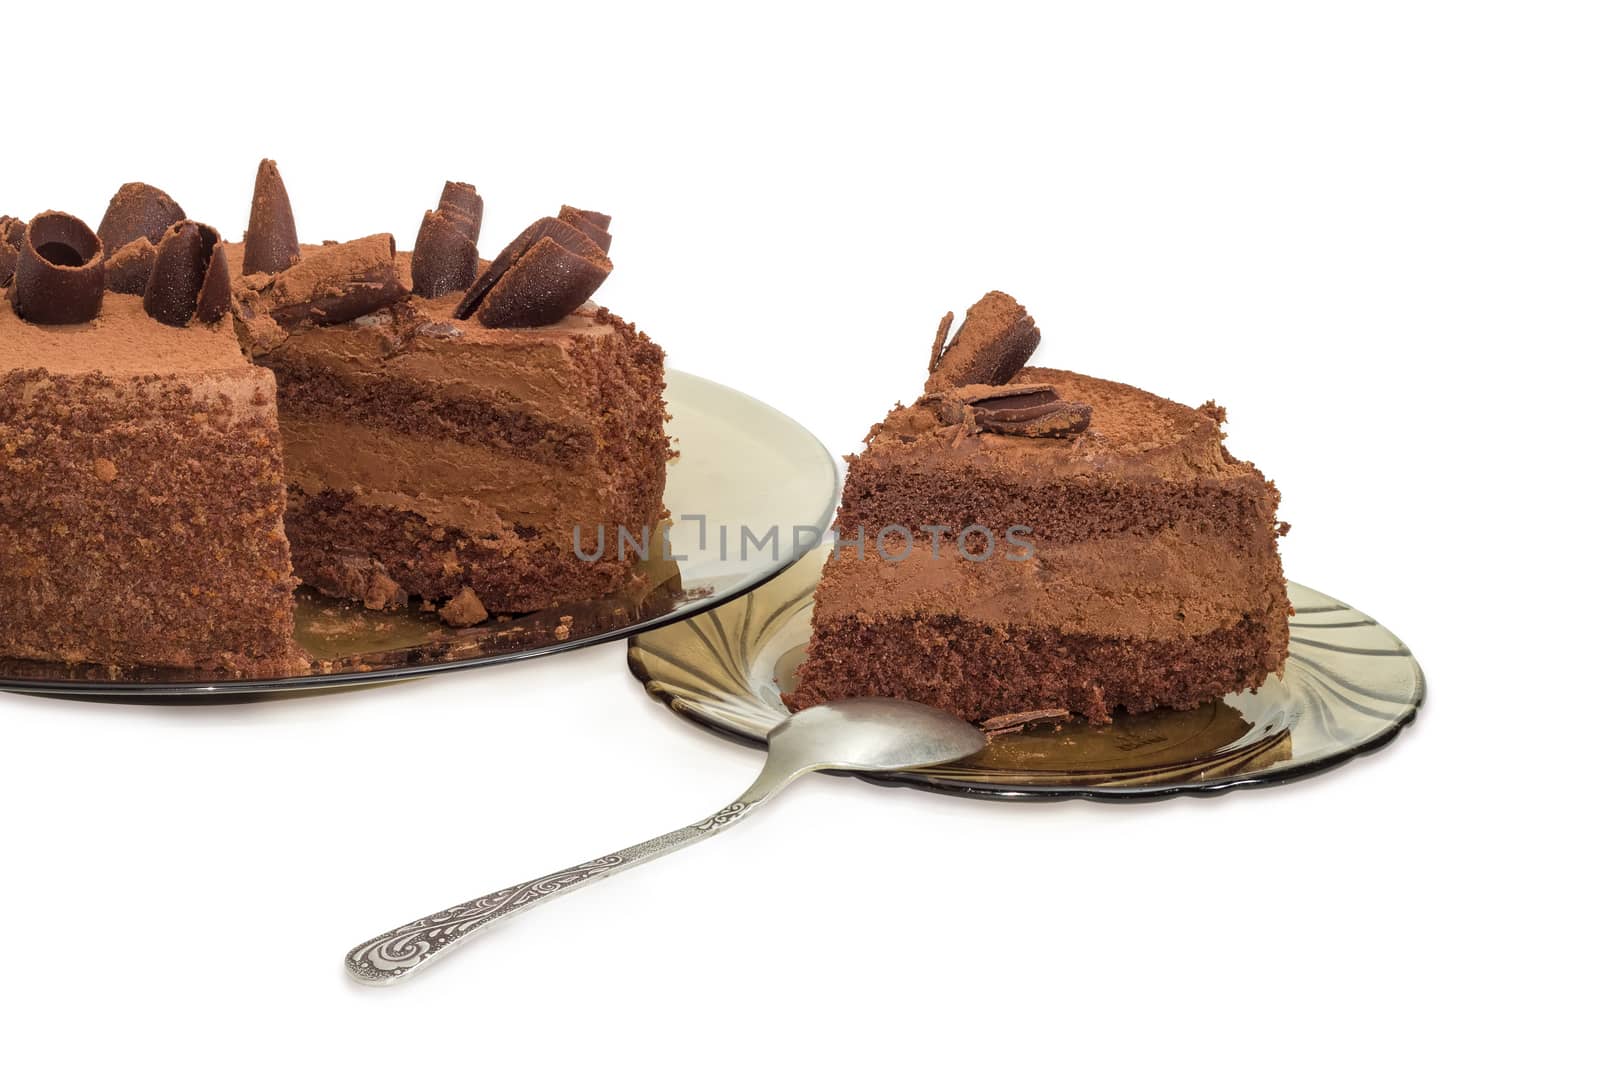 Partly sliced round layered chocolate cake decorated with chocolate chips and sprinkled with cocoa powder on the dark glass dish and slice cake on saucer with spoon on a light background
